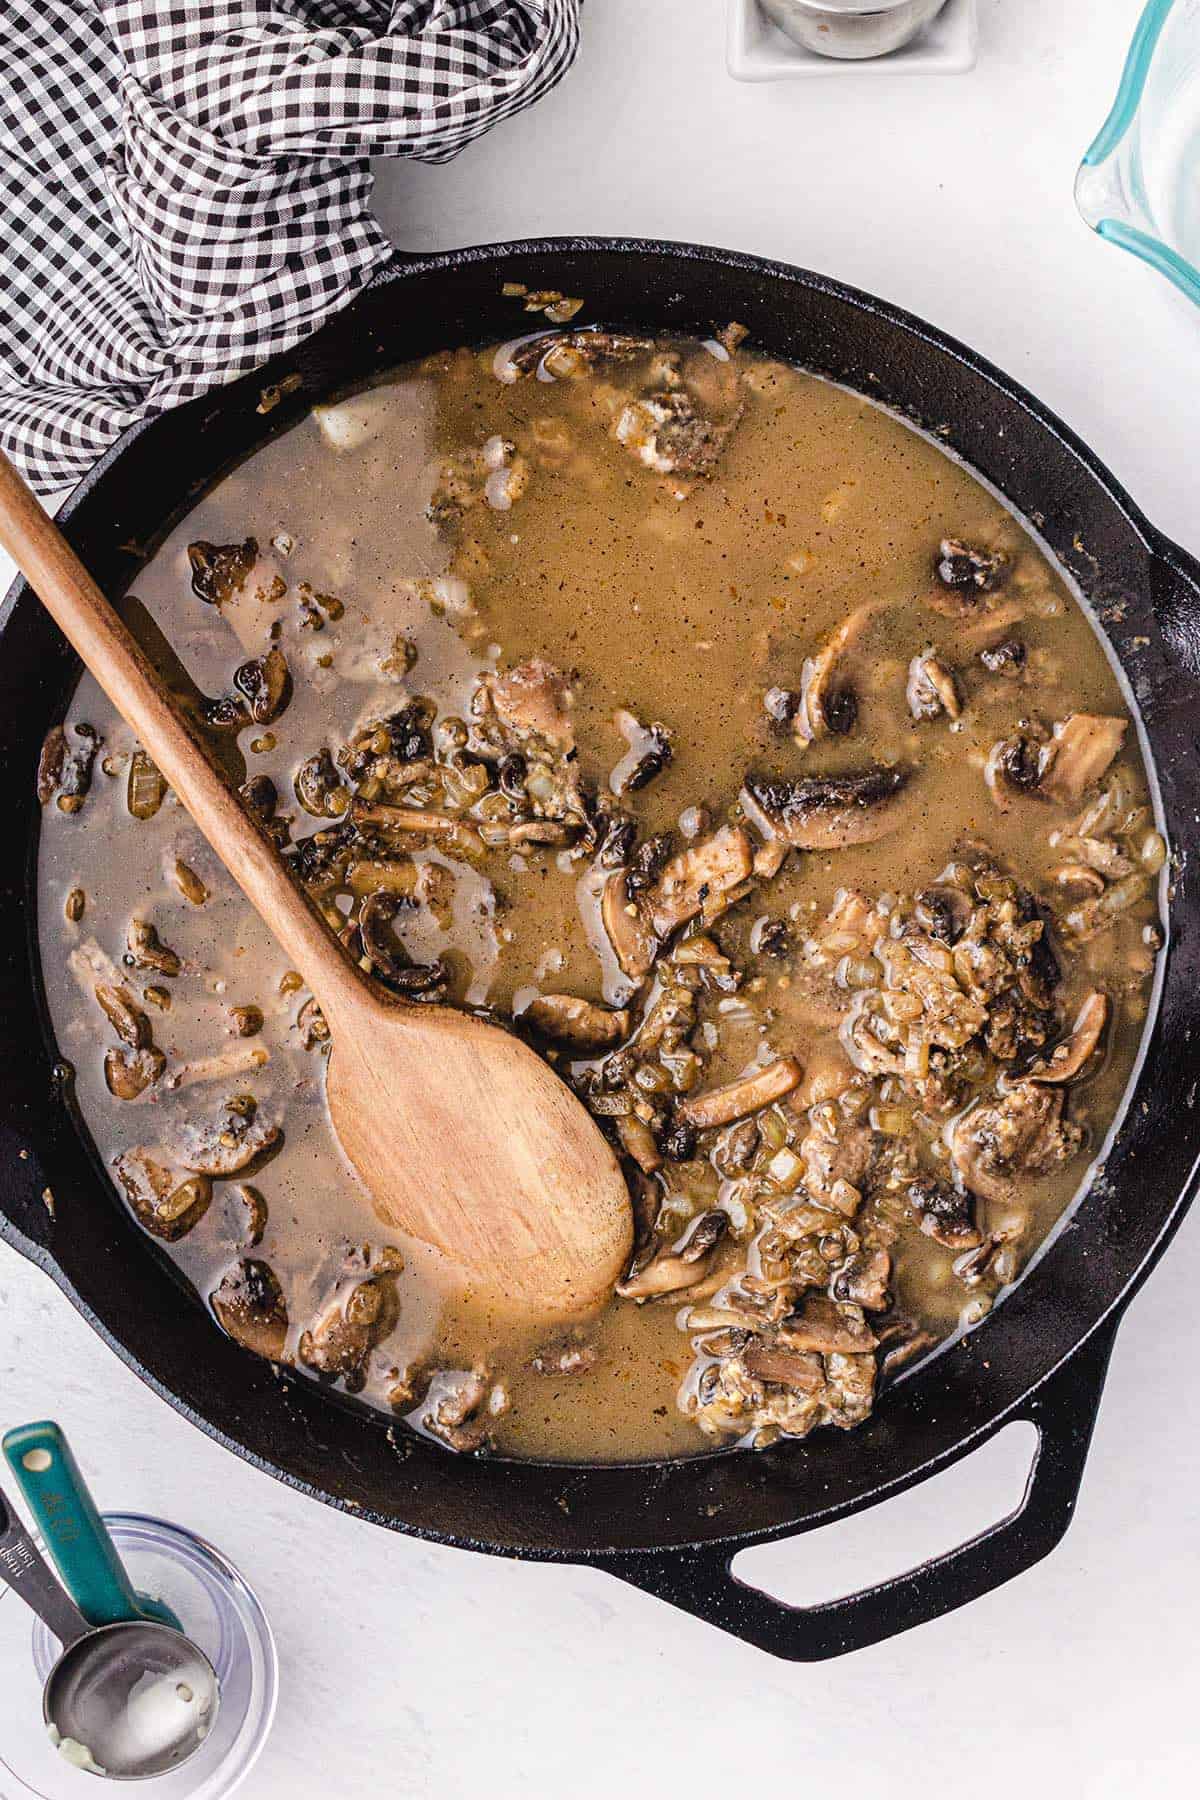 butter, minced garlic, onion, mushrooms, chicken broth mixed together in a frying pan